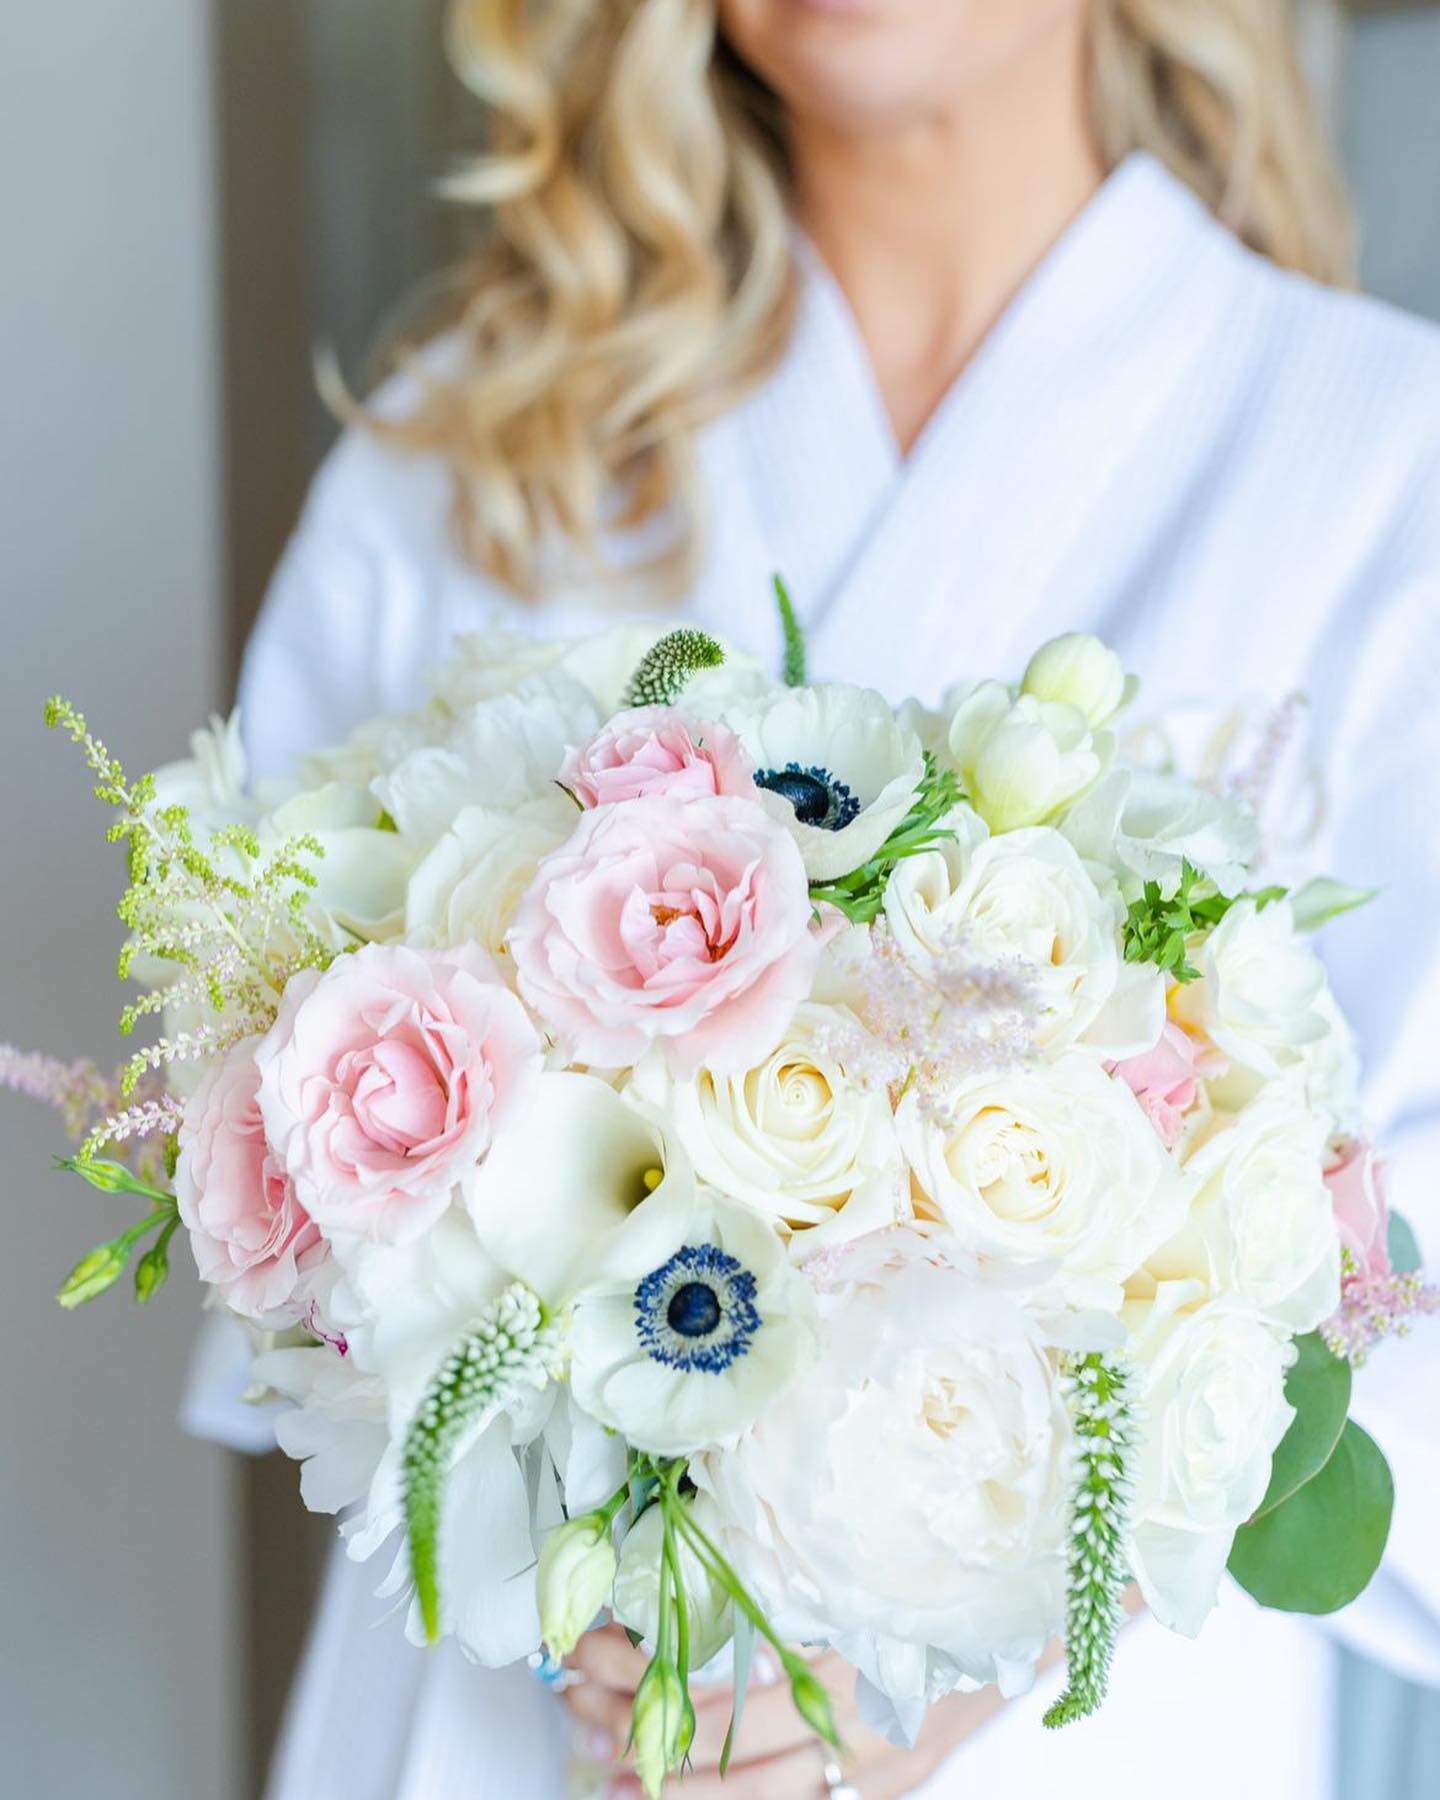 Bride in Robe Holding Floral Bouquet